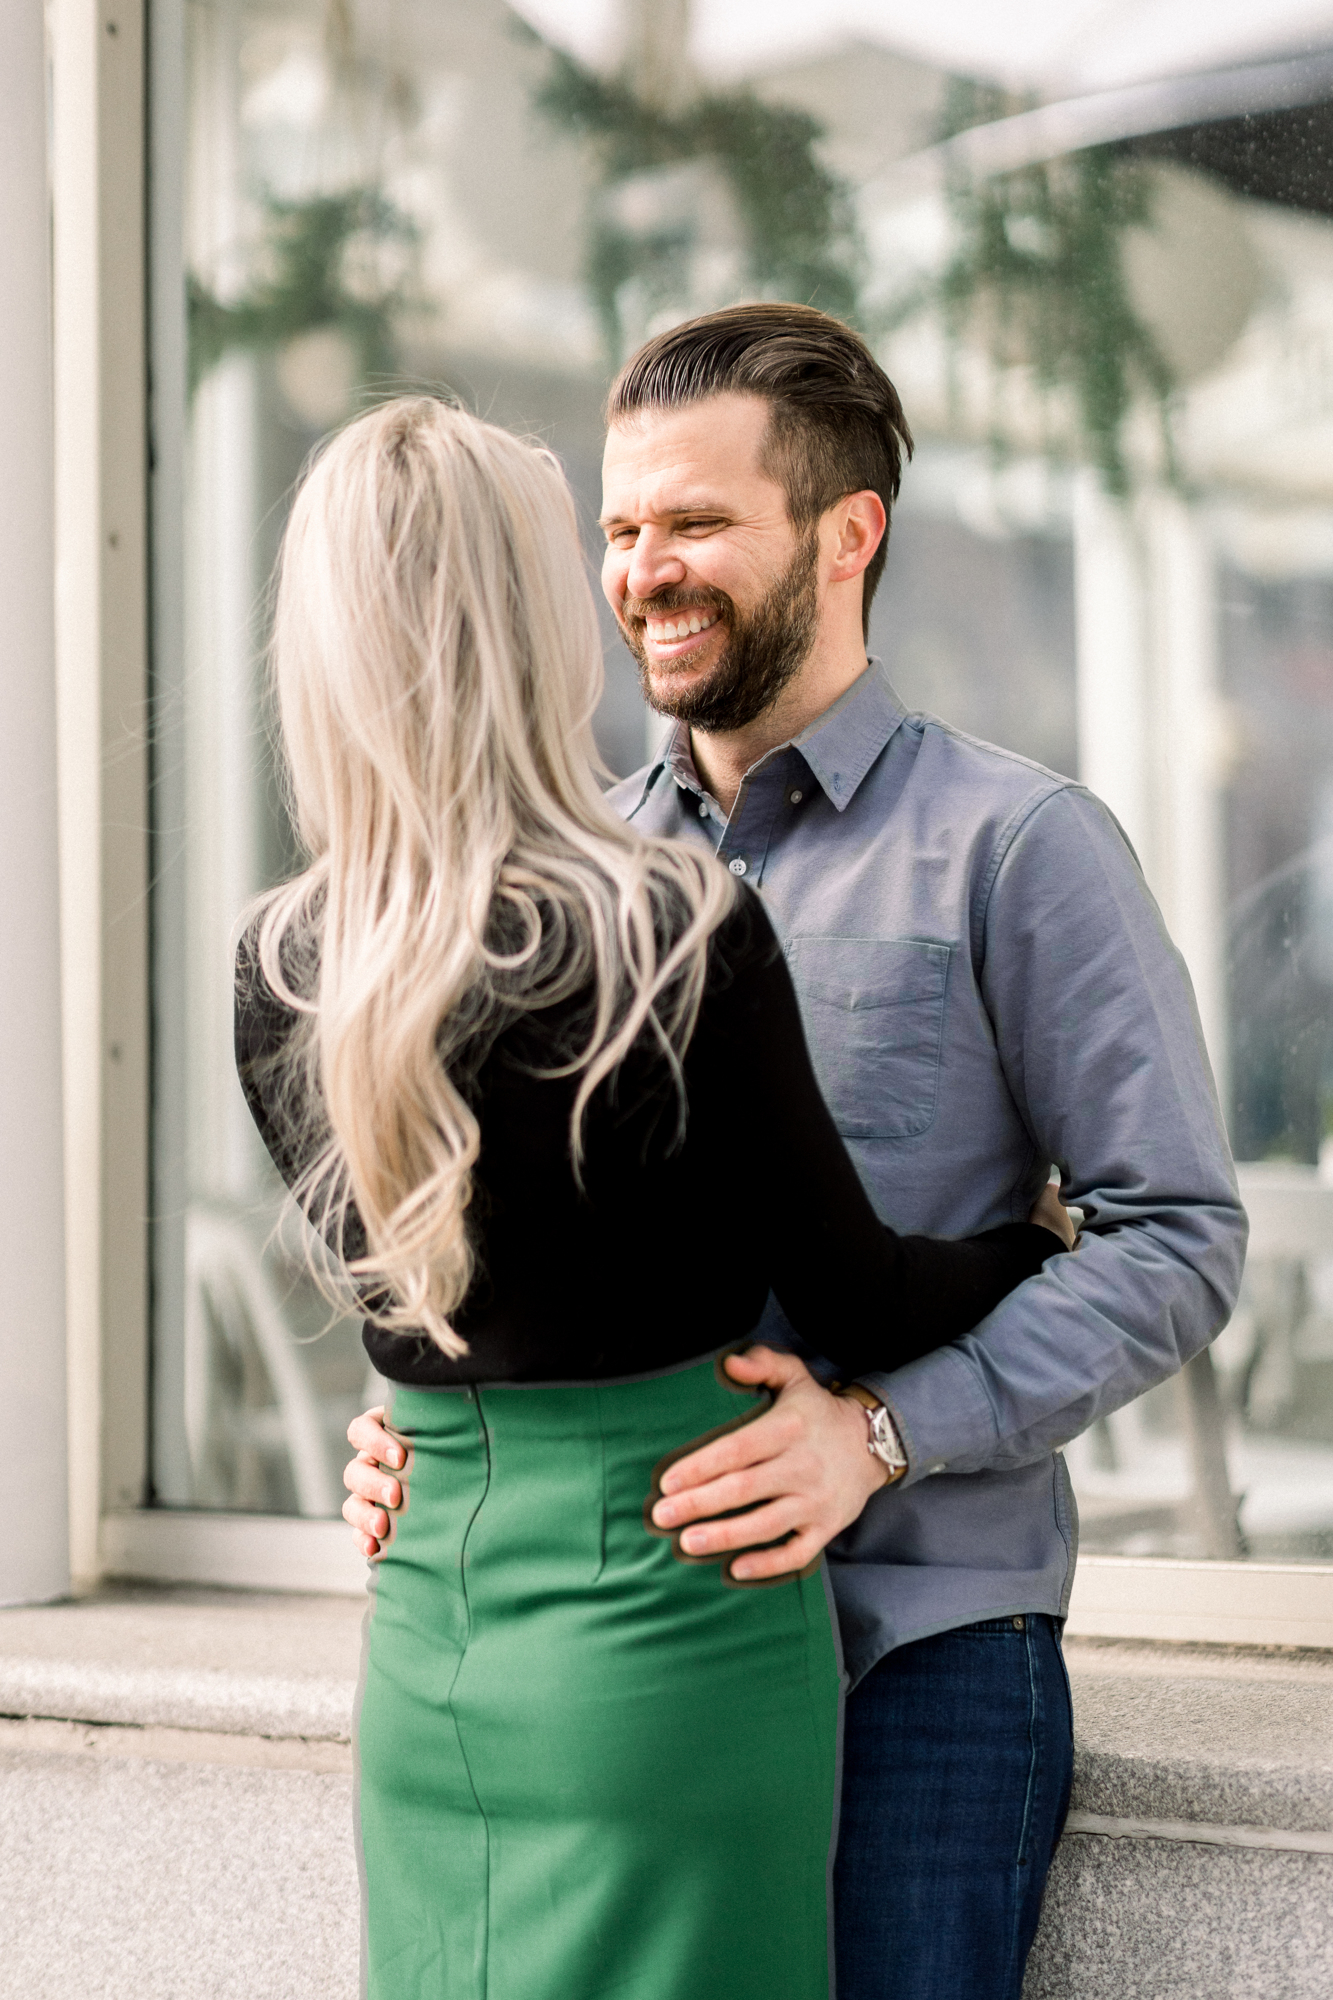 Dazzling South Street Seaport Engagement Photos